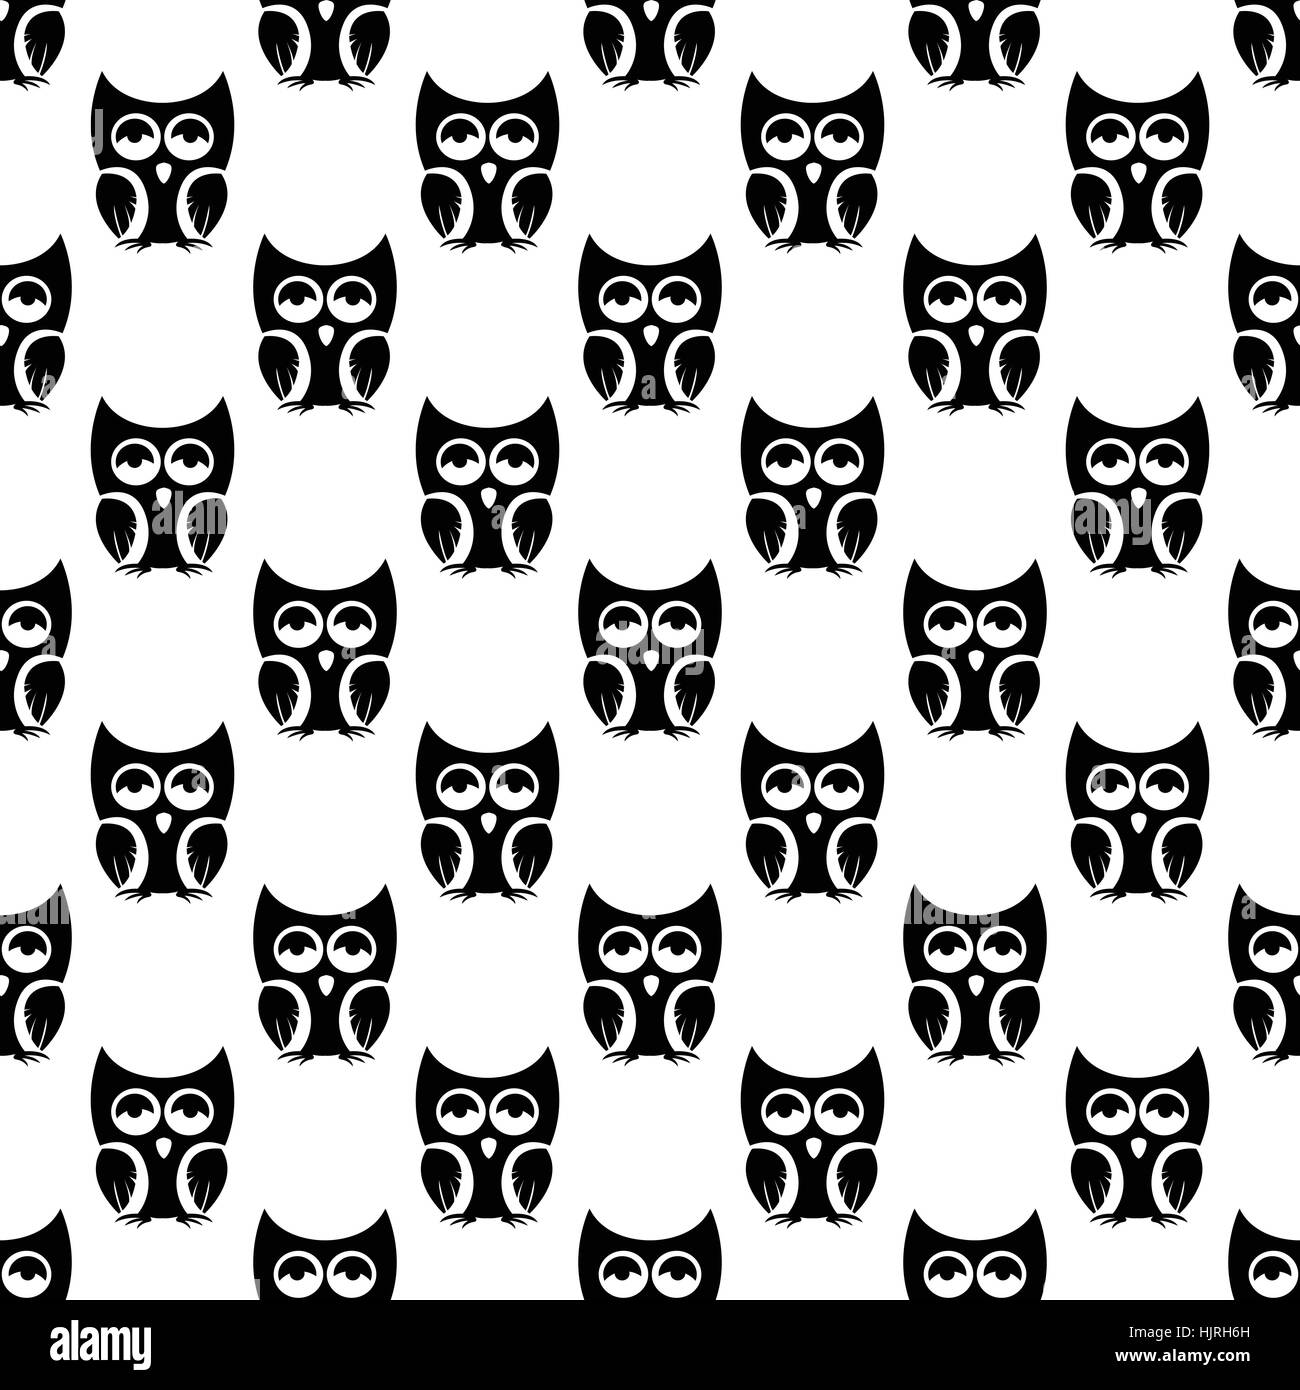 owl-pattern-seamless-best-for-any-design-stock-vector-image-art-alamy